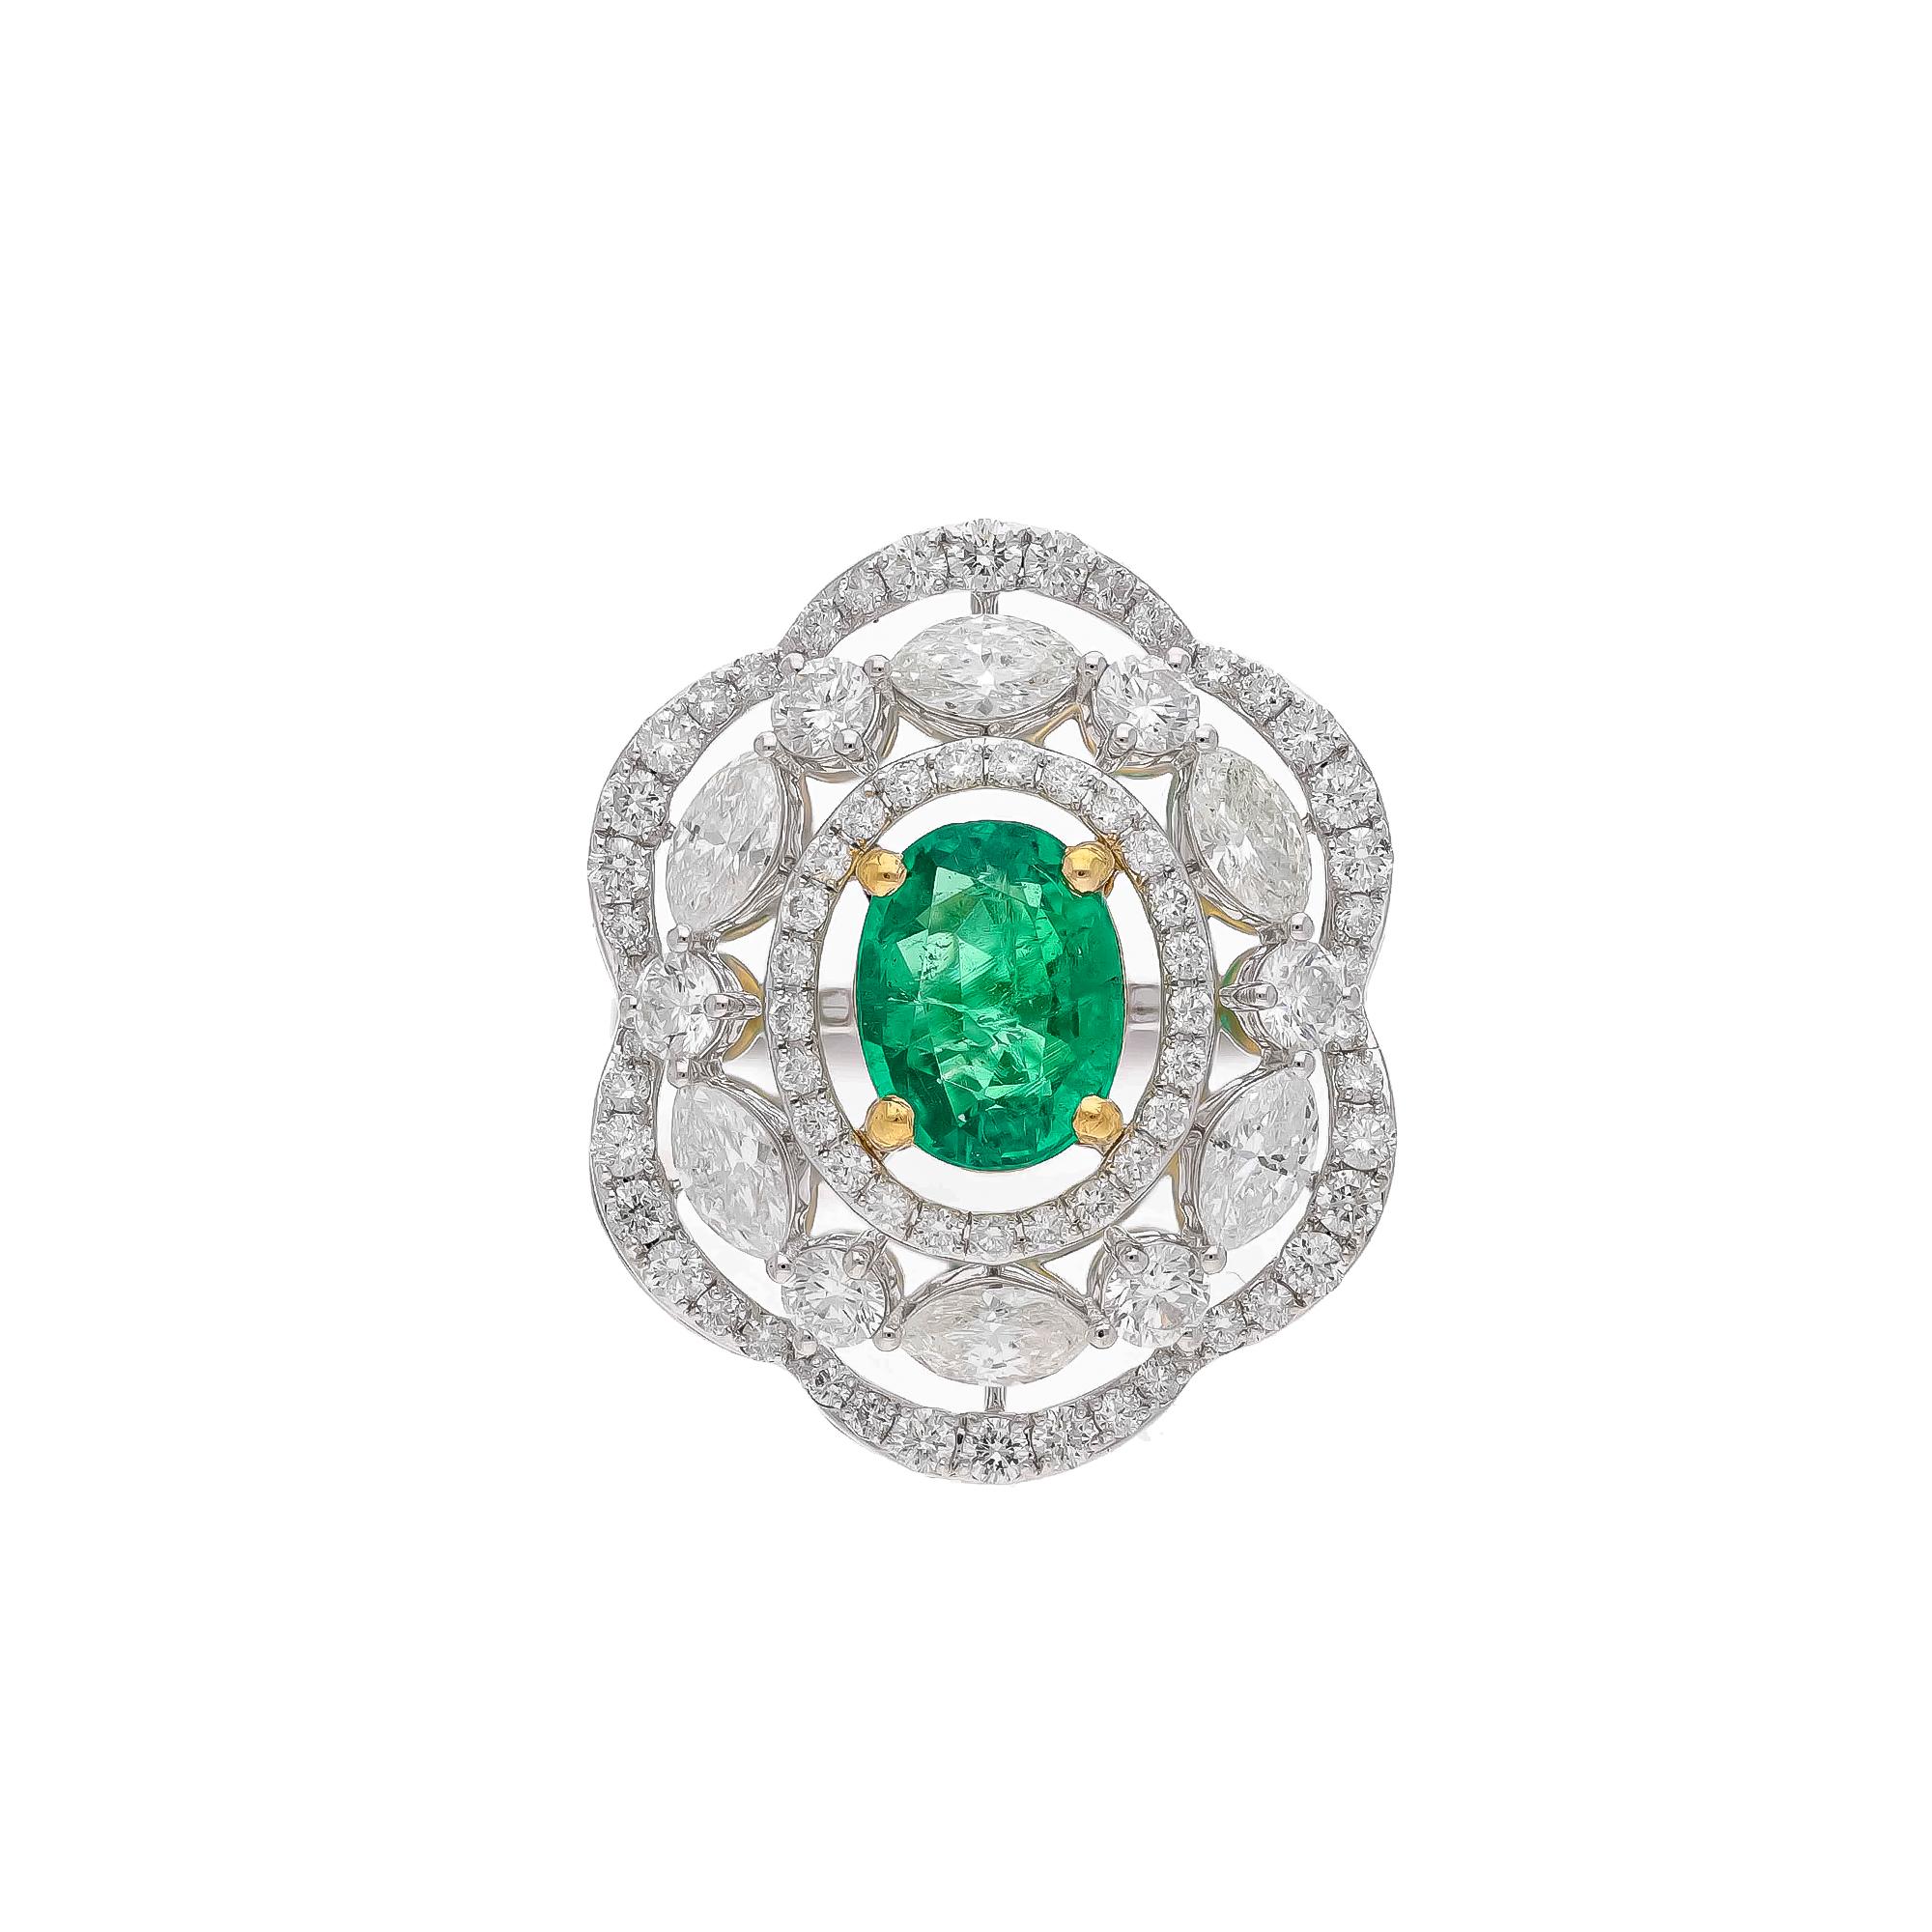 This is a natural Zambian Emerald ring with diamonds and 18k gold. The emeralds are very high quality and very good quality diamonds the clarity is vsi and G colour


Emeralds : 1.61 carats
diamonds : 2.54 carats
gold : 7.390 gms

This is a Brand